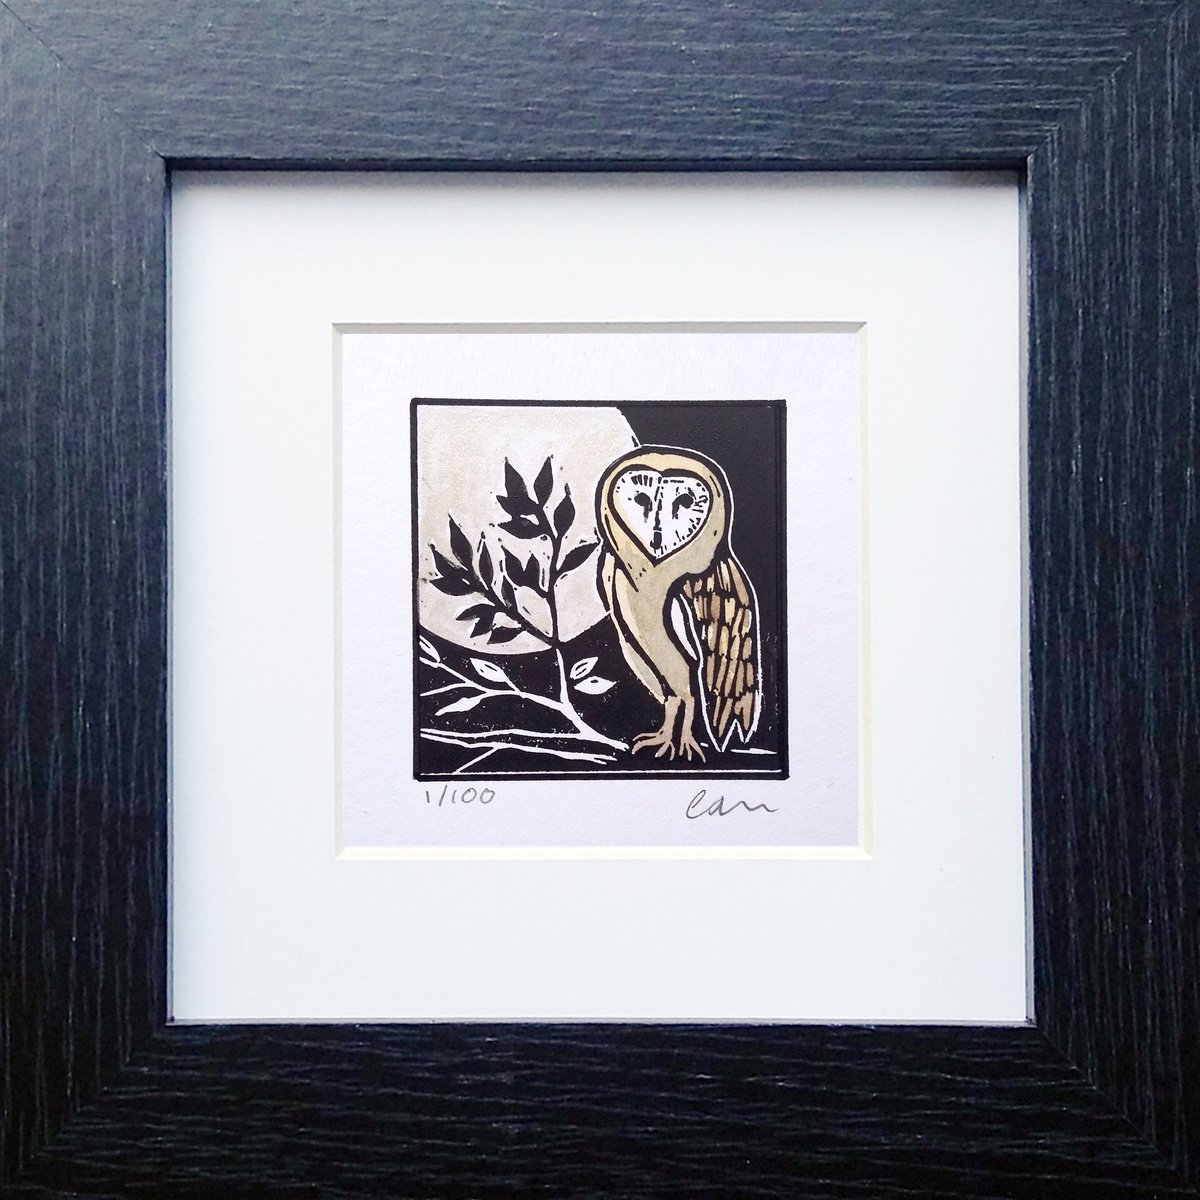 Moonlight barn owl - miniature hand painted linocut print - Framed and ready to hang by Carolynne Coulson